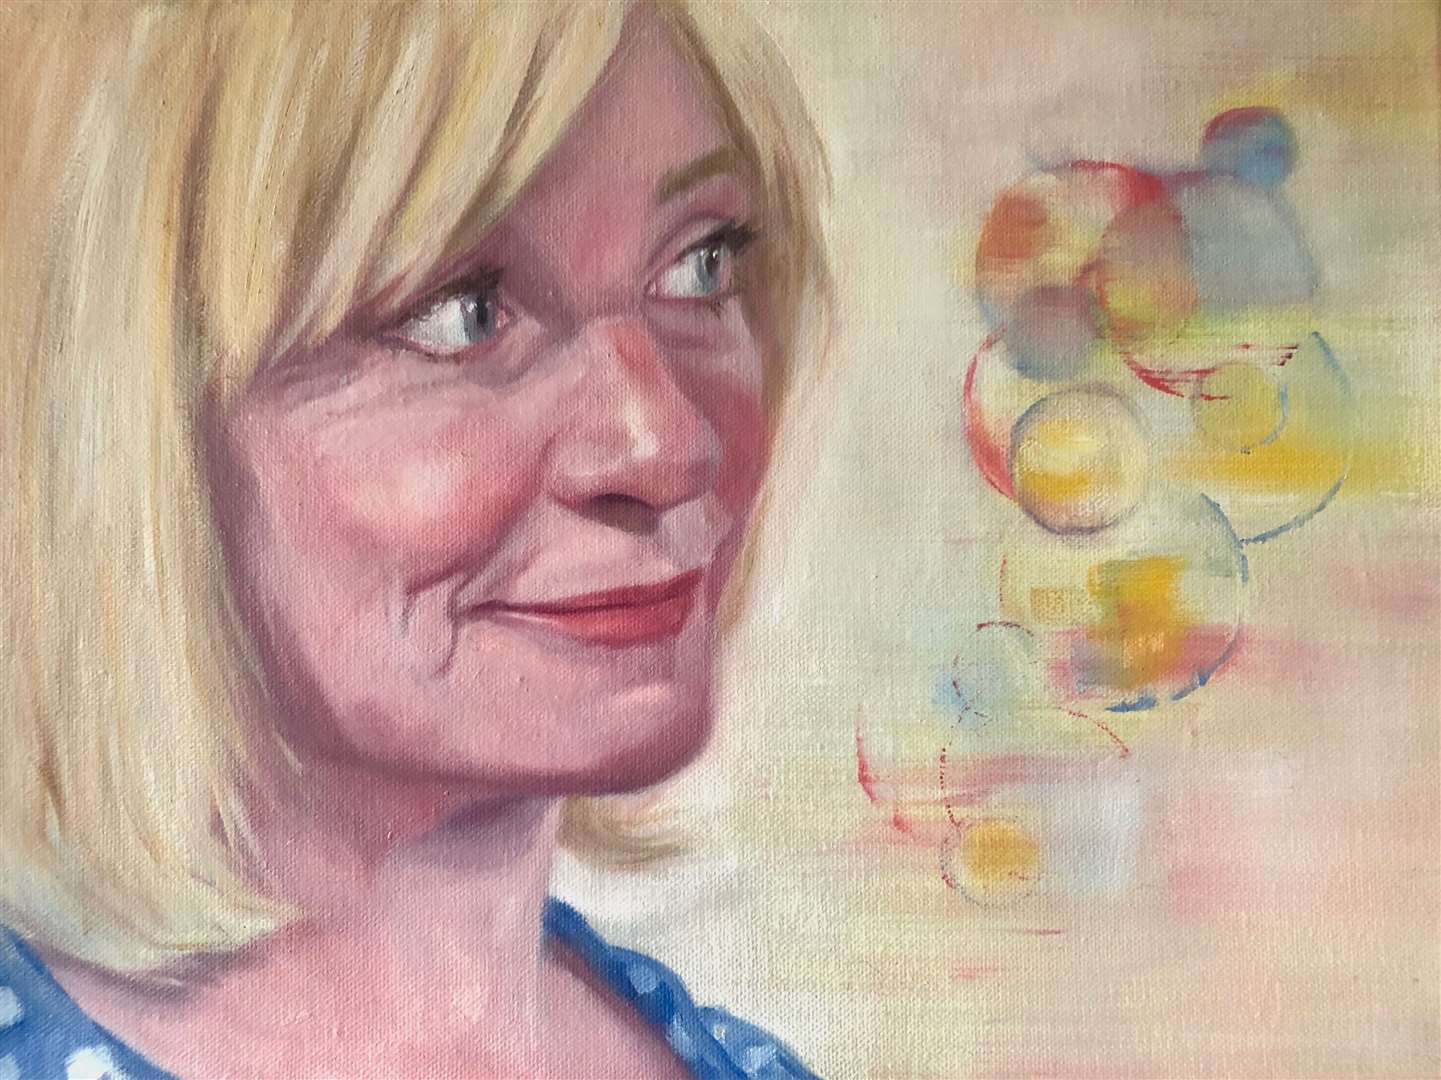 Deborah's second attempt at the portrait of Jane Horrocks – with a nod to the actor's iconic Bubbles character in the comedy programme Ab Fab. Picture: Deborah Pearse